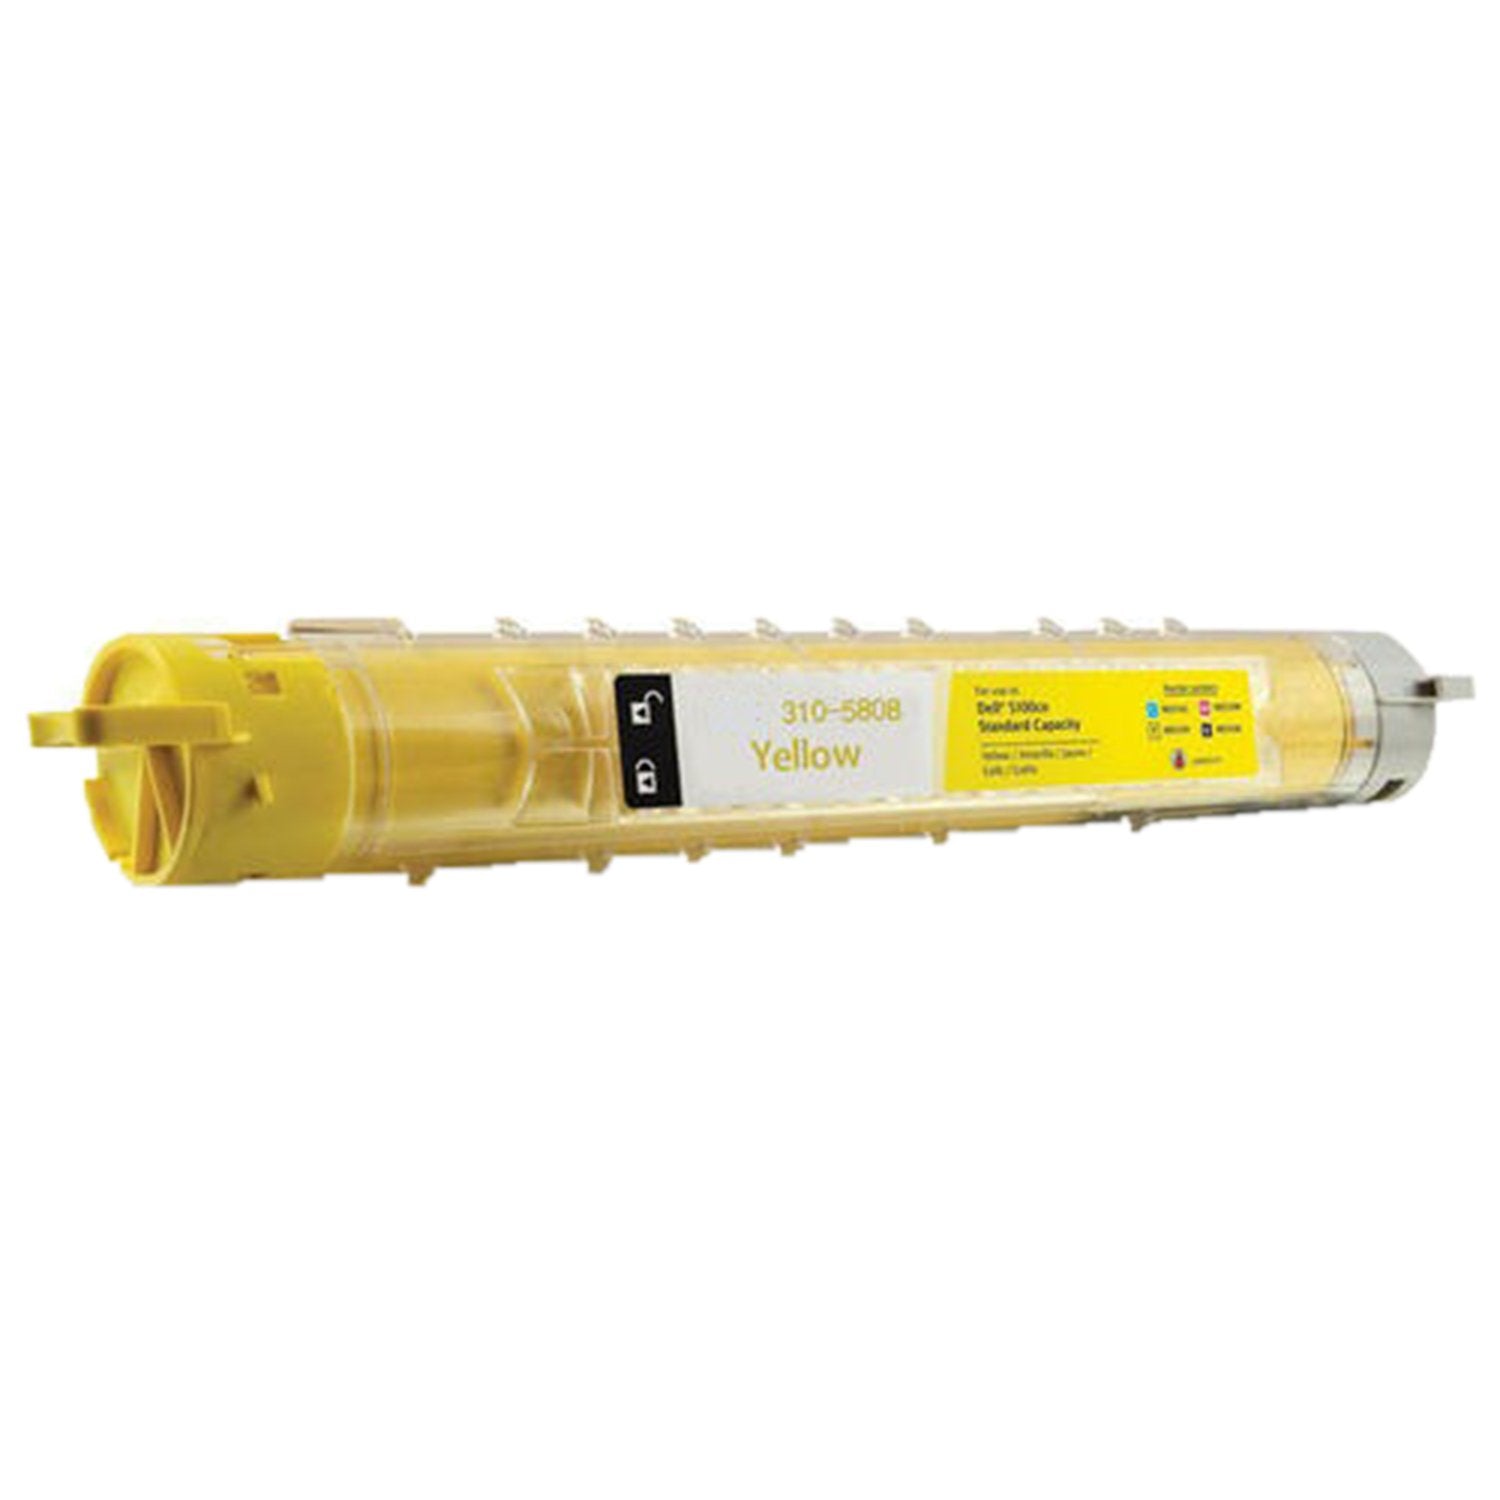 Absolute Toner Compatible DELL 310-5808 Yellow Toner Cartridge | Absolute Toner Dell Toner Cartridges